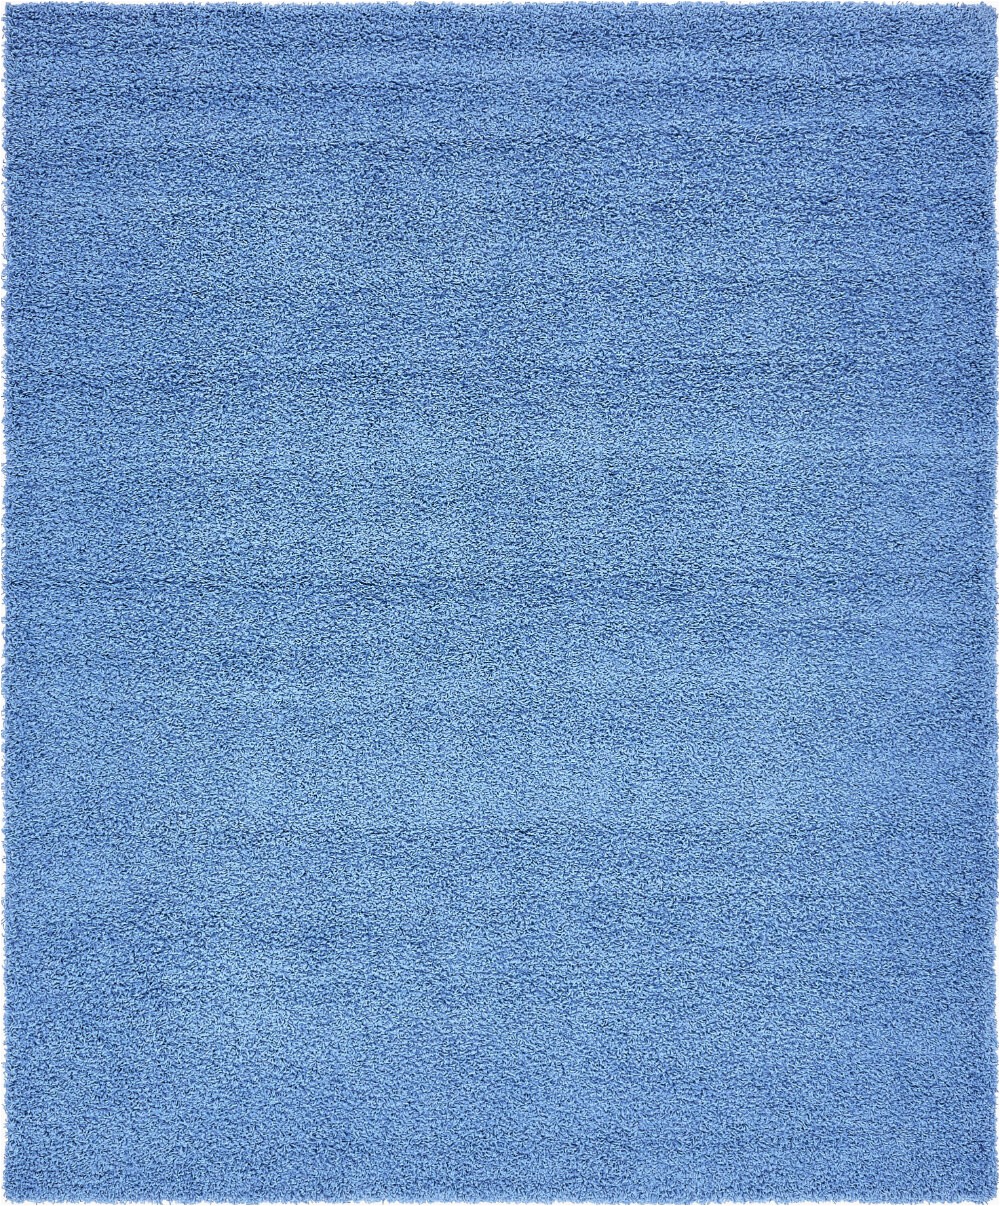 Turn on the Brights Angeline Periwinkle Blue Area Rug W L167 K W refid=PINTO49 W &PiID[]=